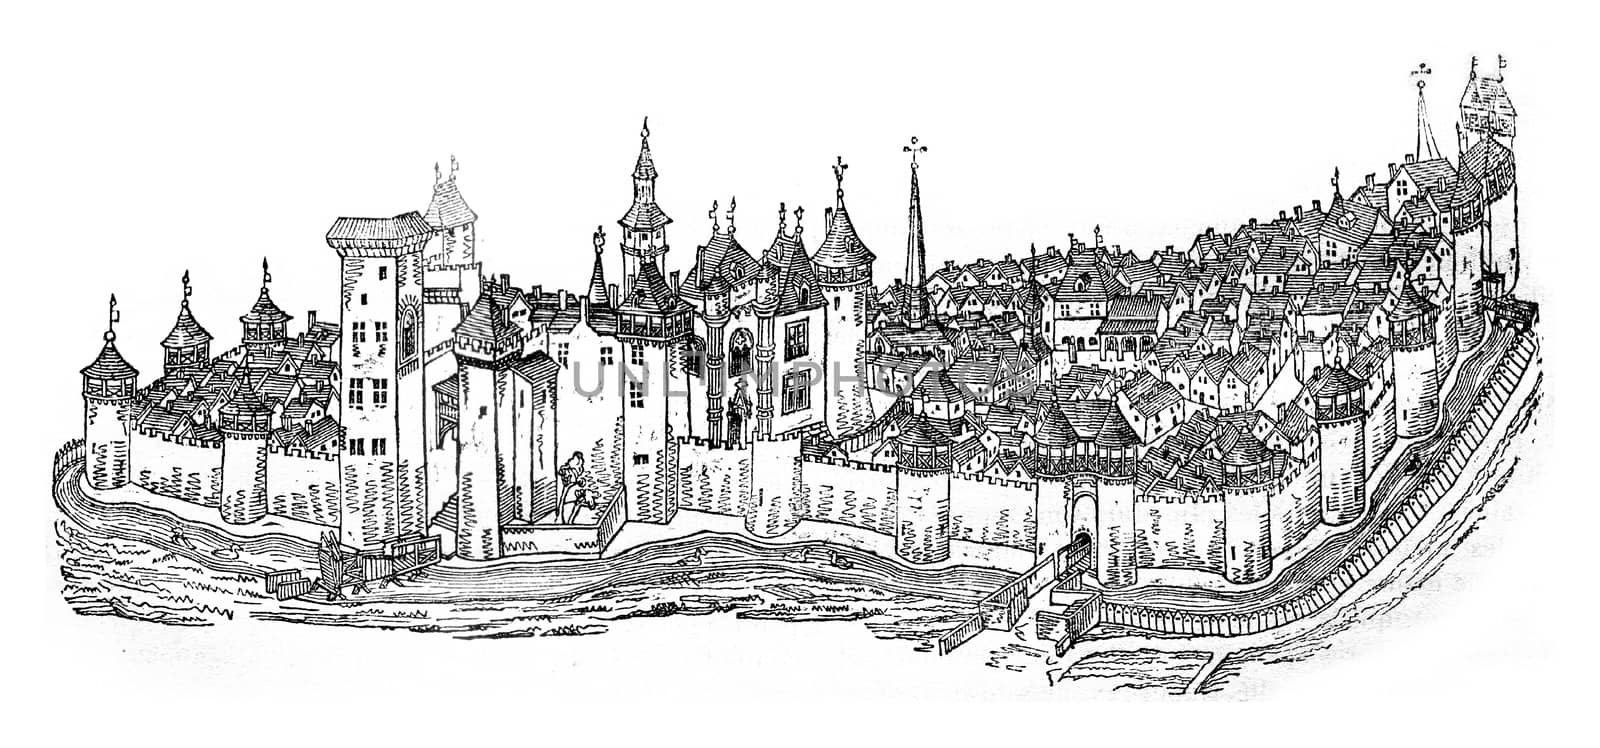 The city and the castle of Moulins, after a manuscript of the fifteenth century
